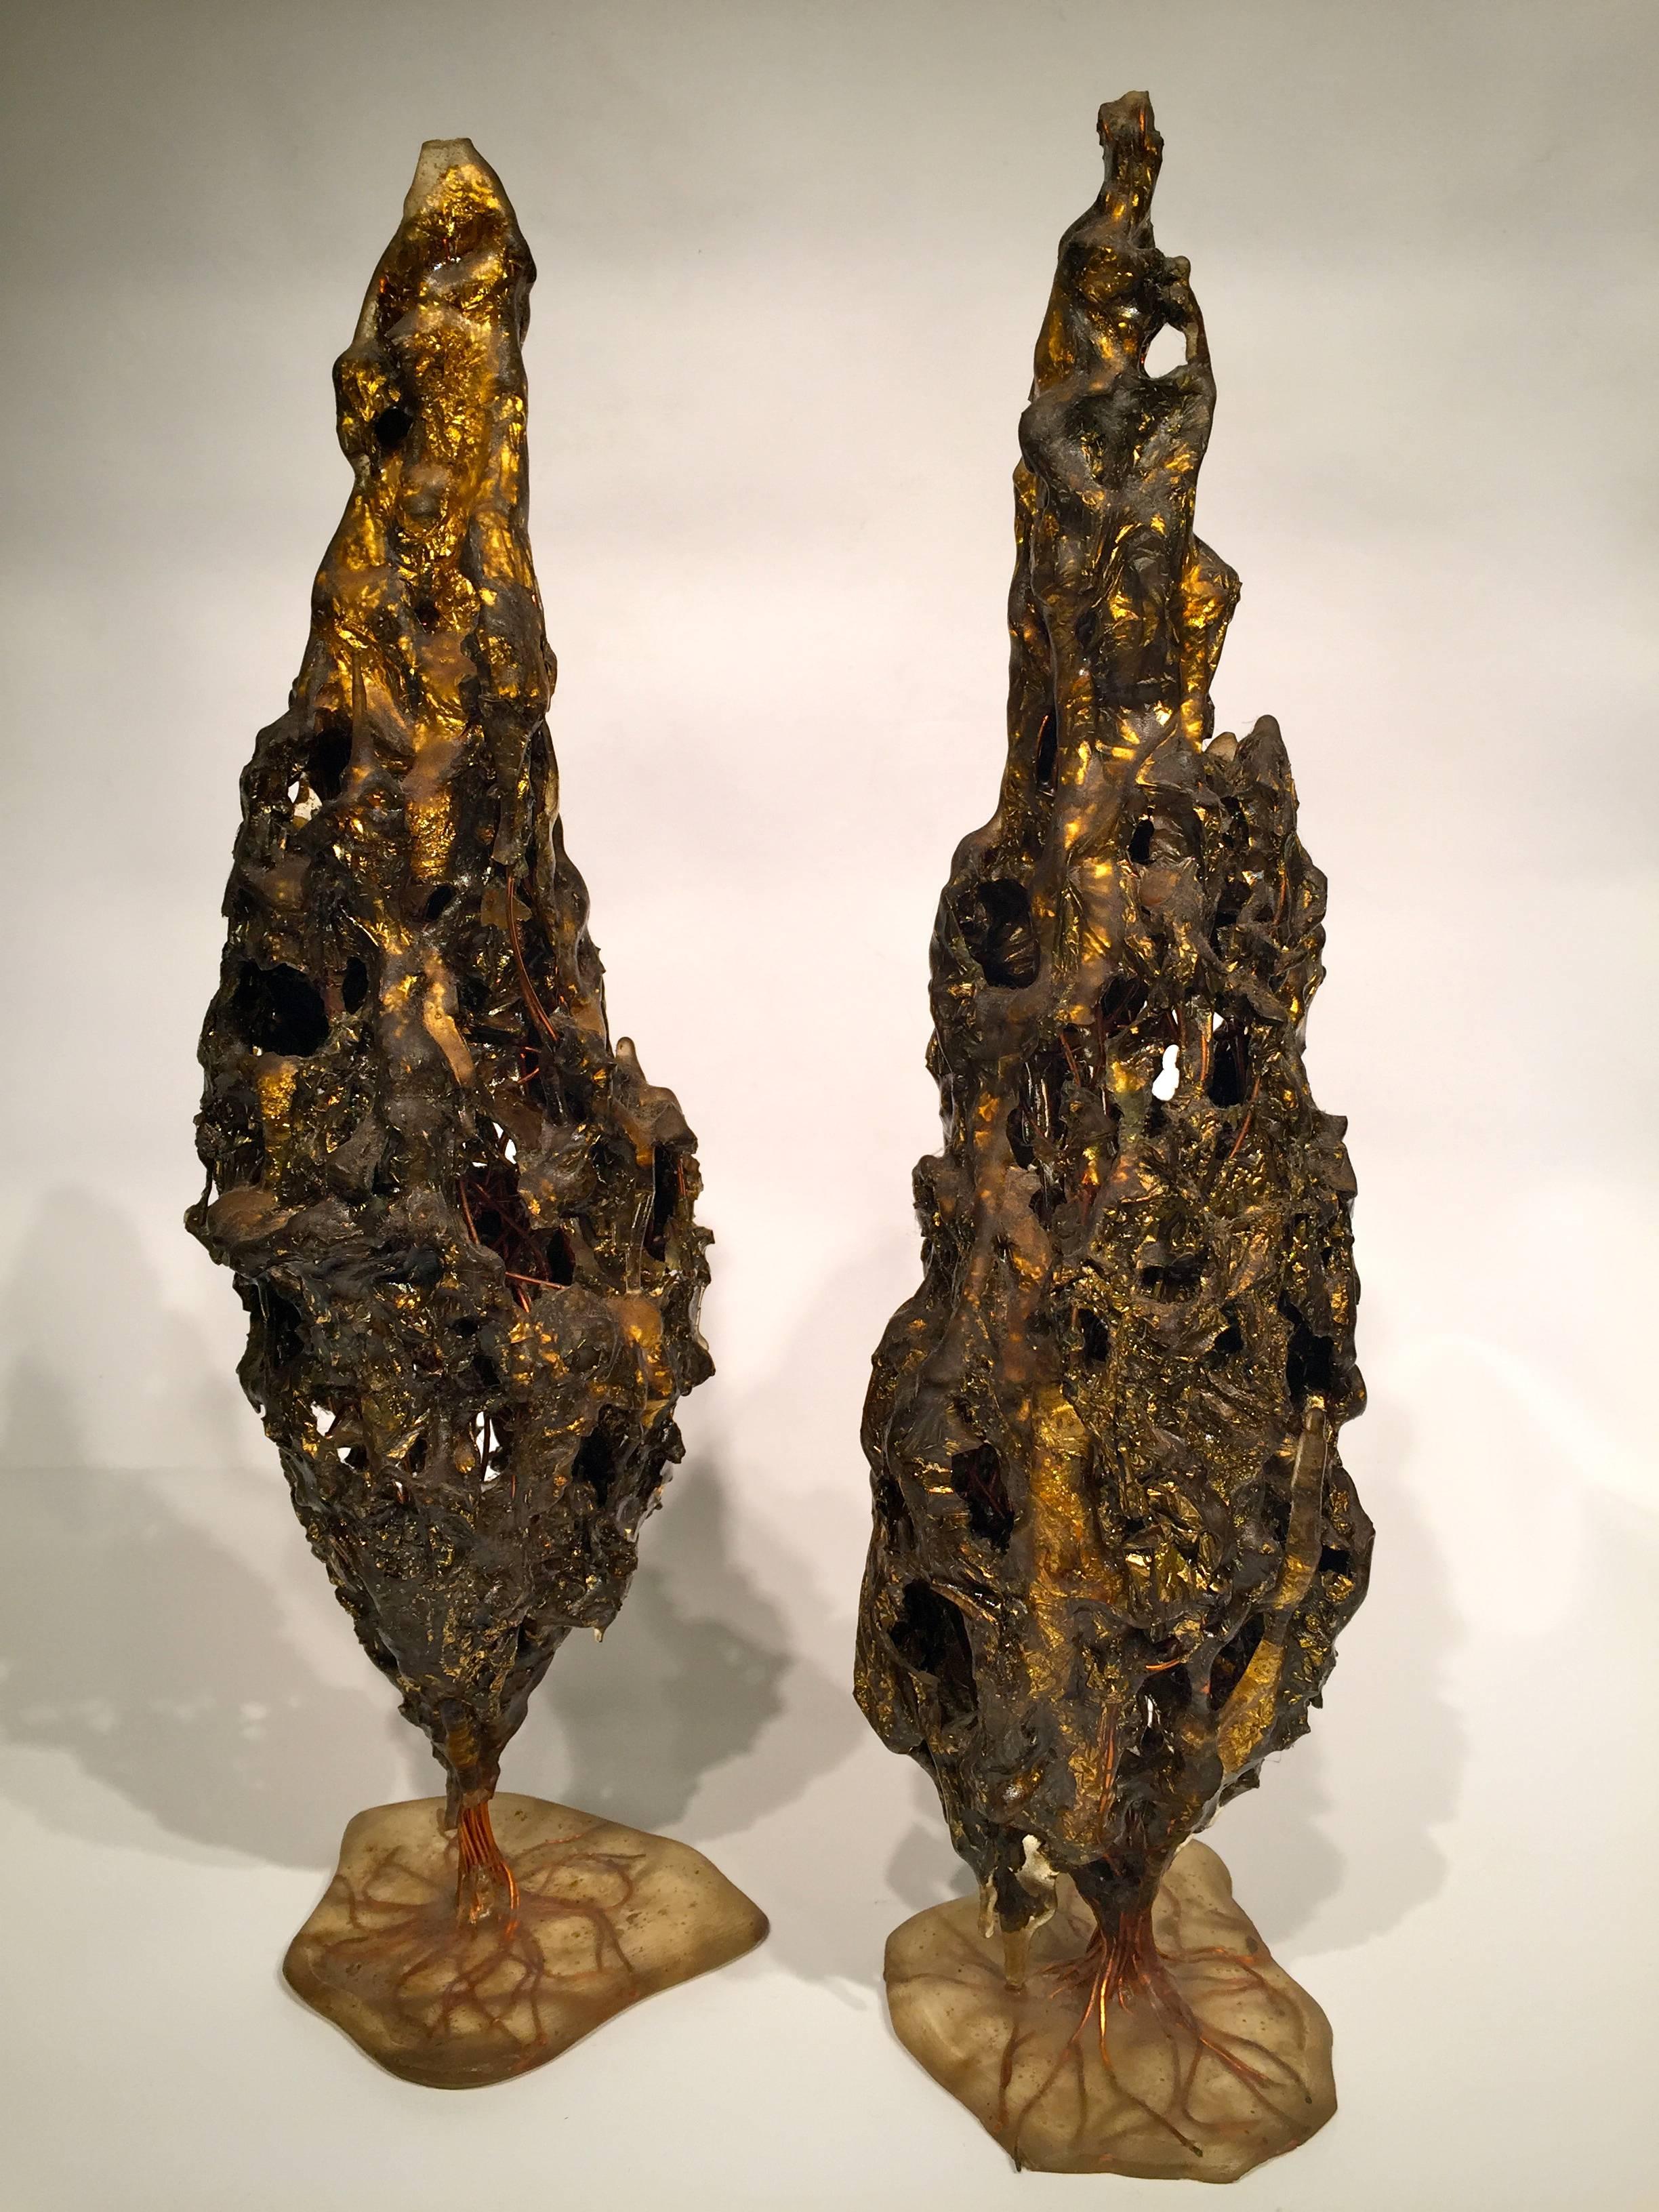 Composition Maurício Bentes Brazilian Pair of Resin, Gold and Copper Tree Sculptures For Sale